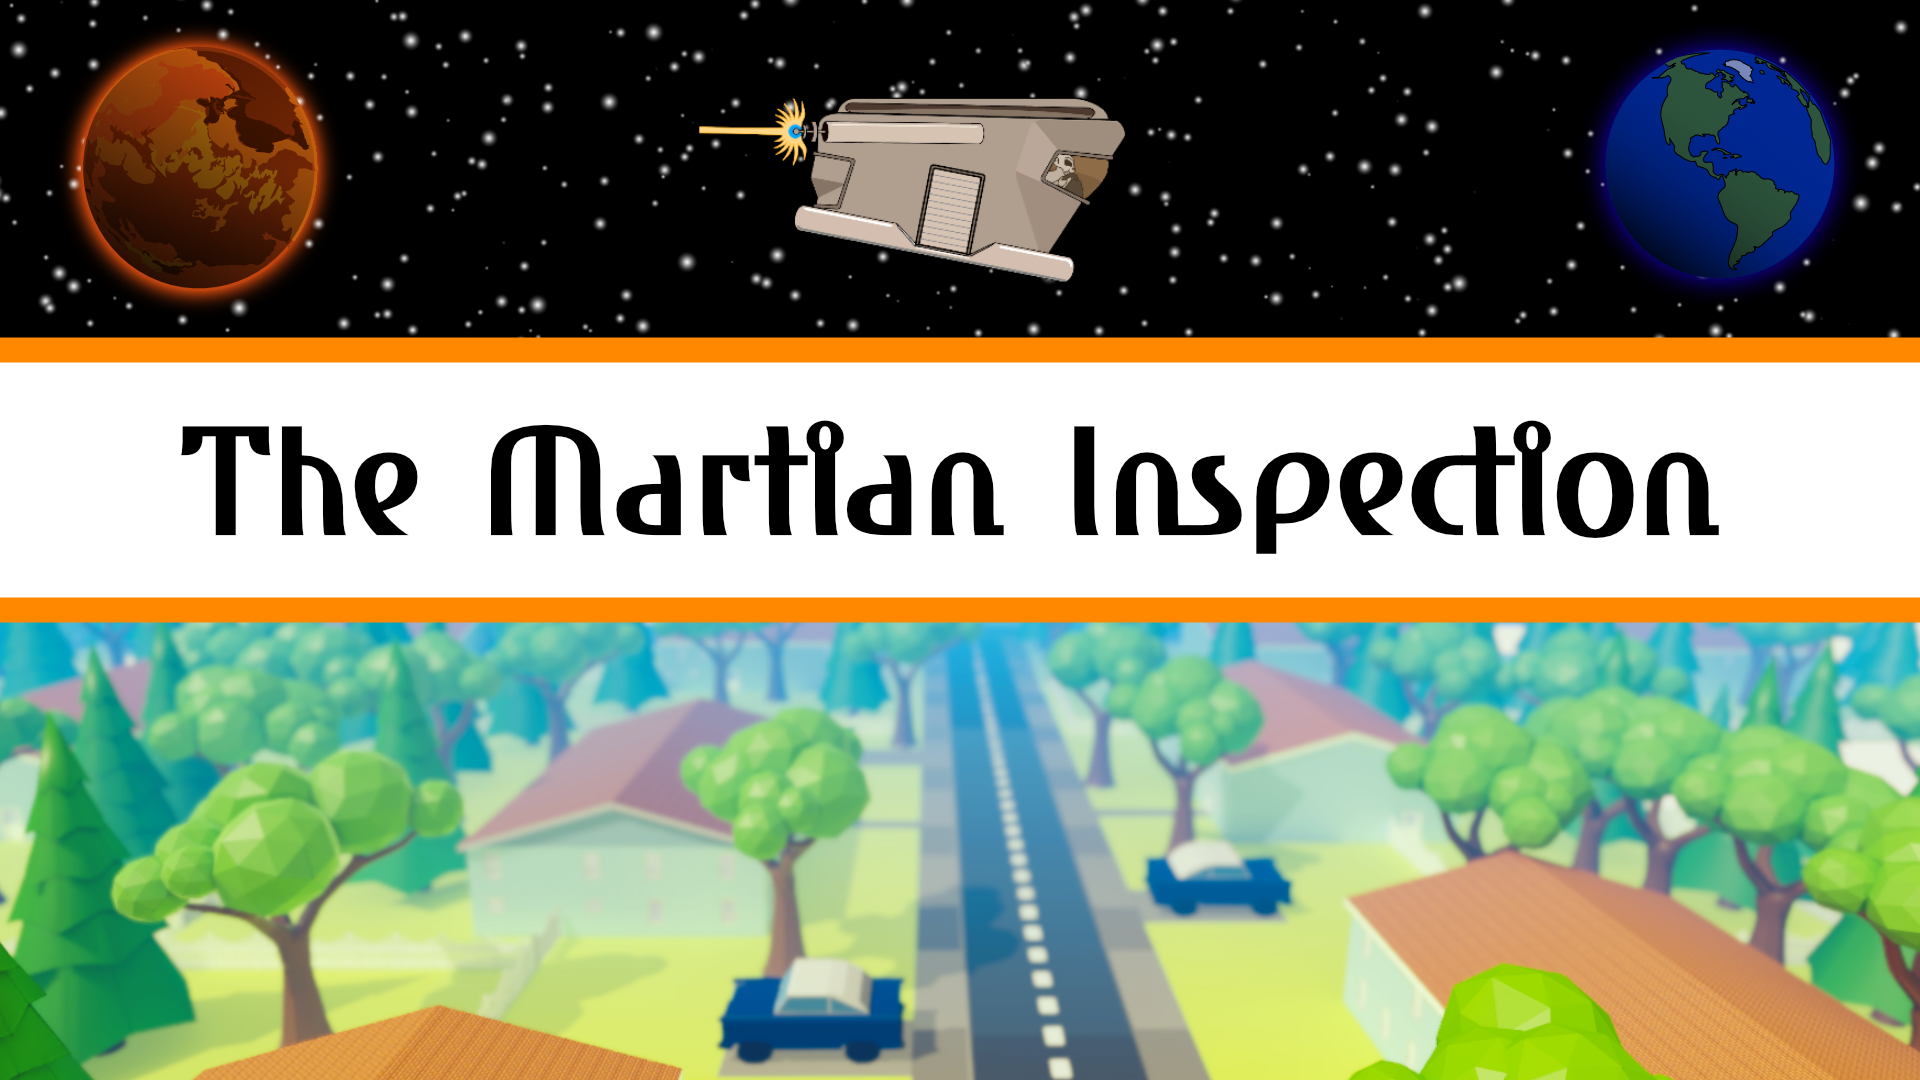 The Martian Inspection